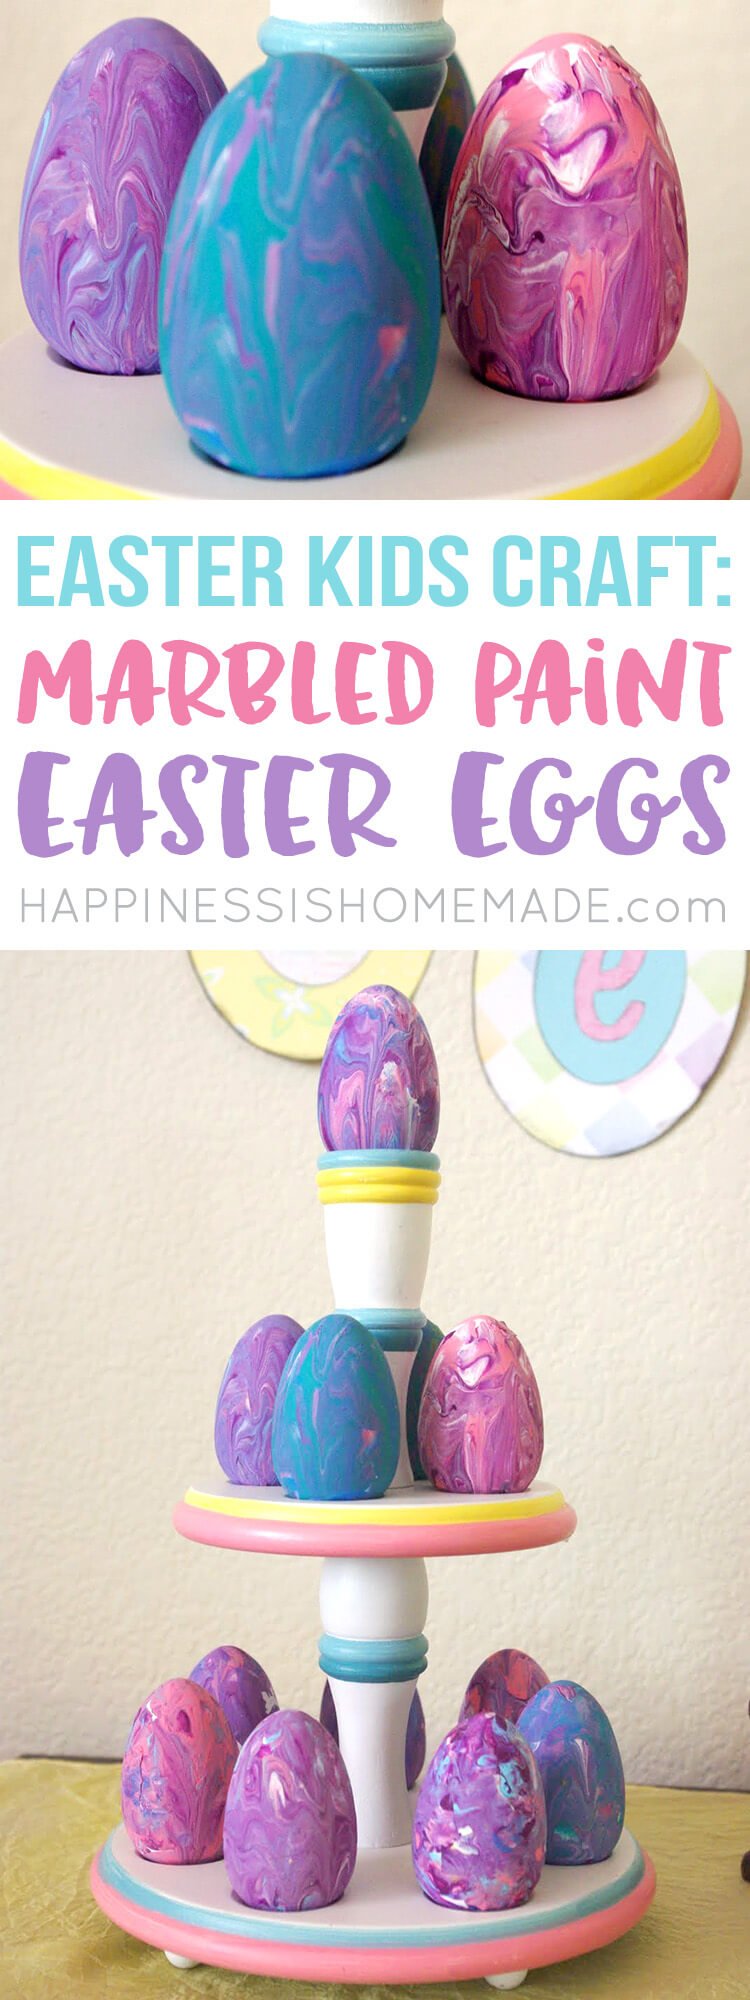 easter kids craft: marbled paint easter eggs 